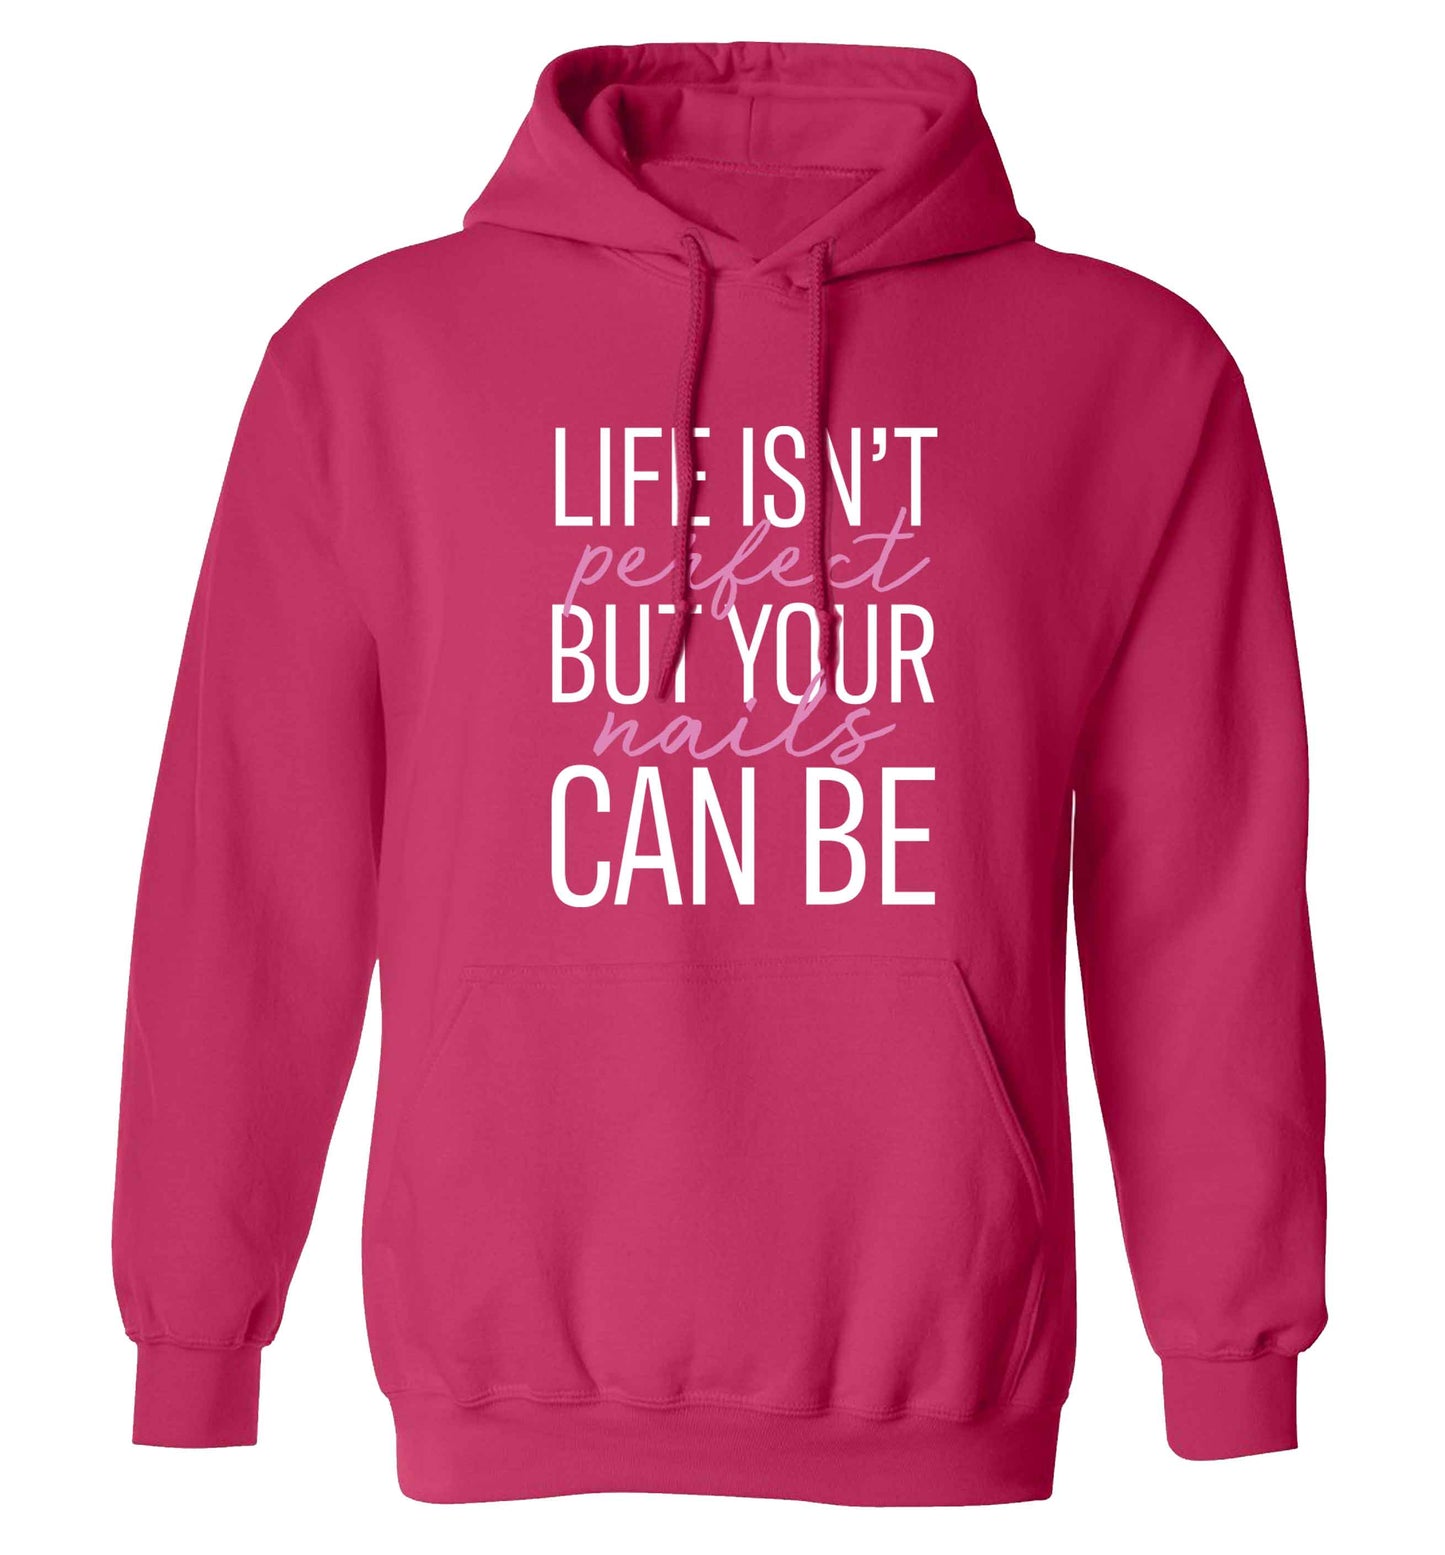 Life isn't perfect but your nails can be adults unisex pink hoodie 2XL